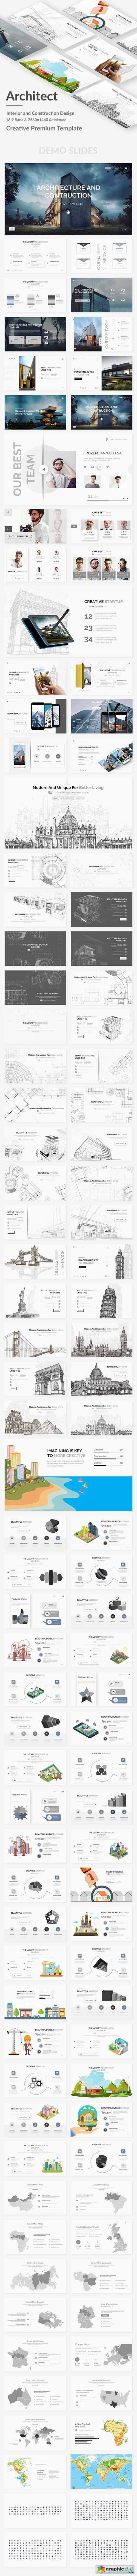 Architecture Interior and Construction Design Powerpoint Template